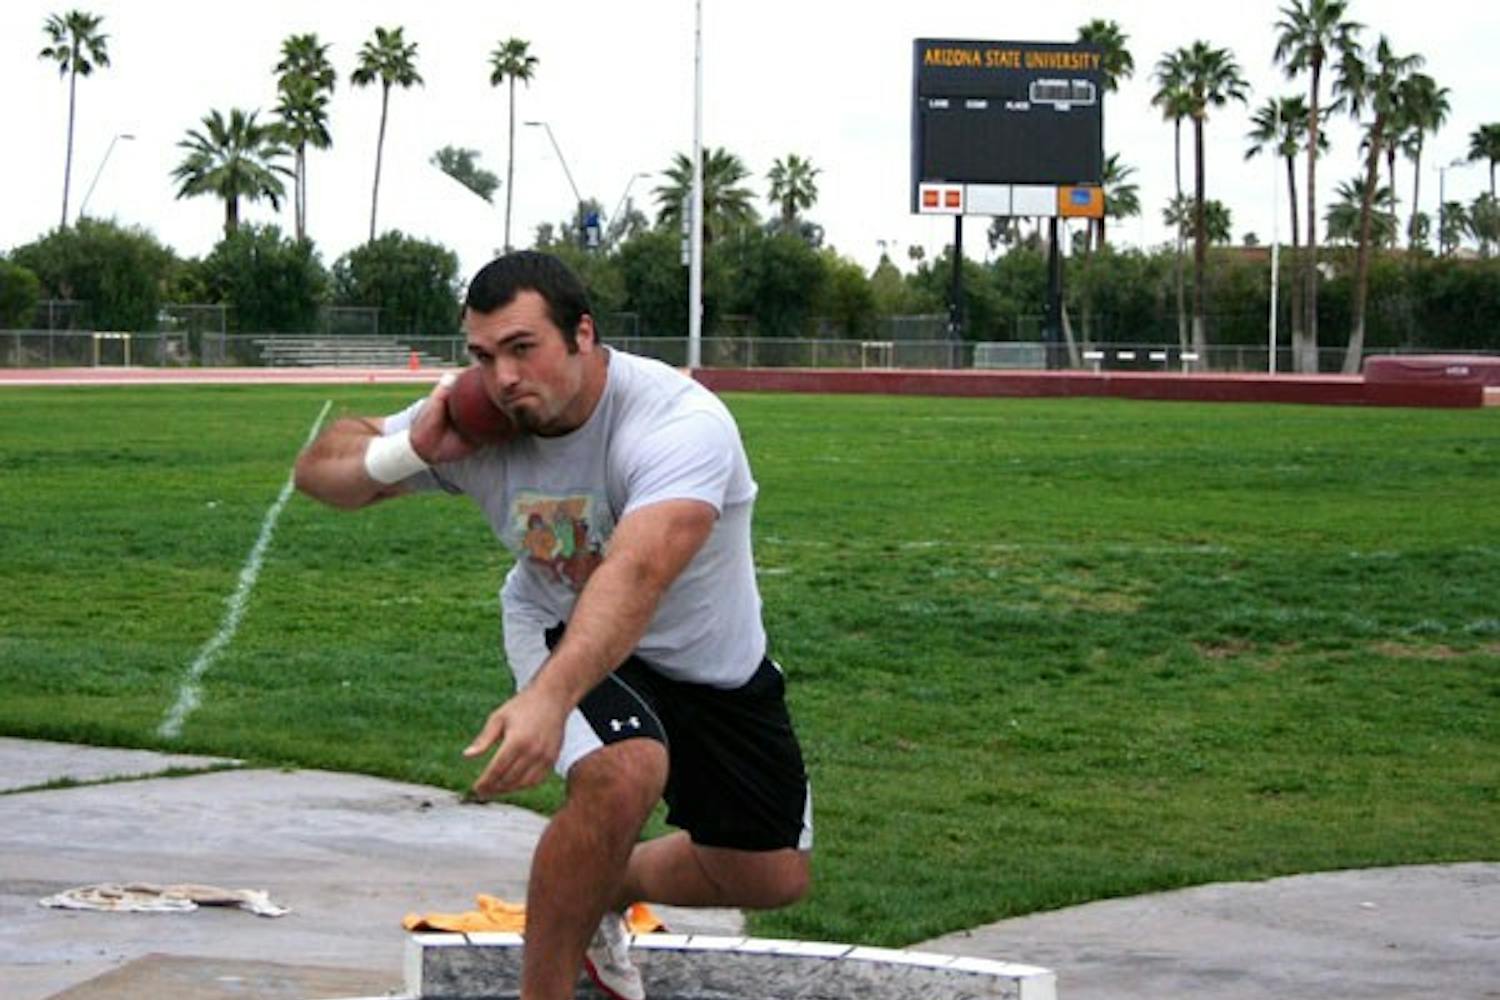 CHAMPIONSHIP-BOUND: Freshman Jordan Clarke practices the shot put during practice at Sun Angel Stadium. ASU will send 11 athletes to the NCAA Indoor Championship meet in Fayetteville, Ark. (Photo by Kyle Thompson)